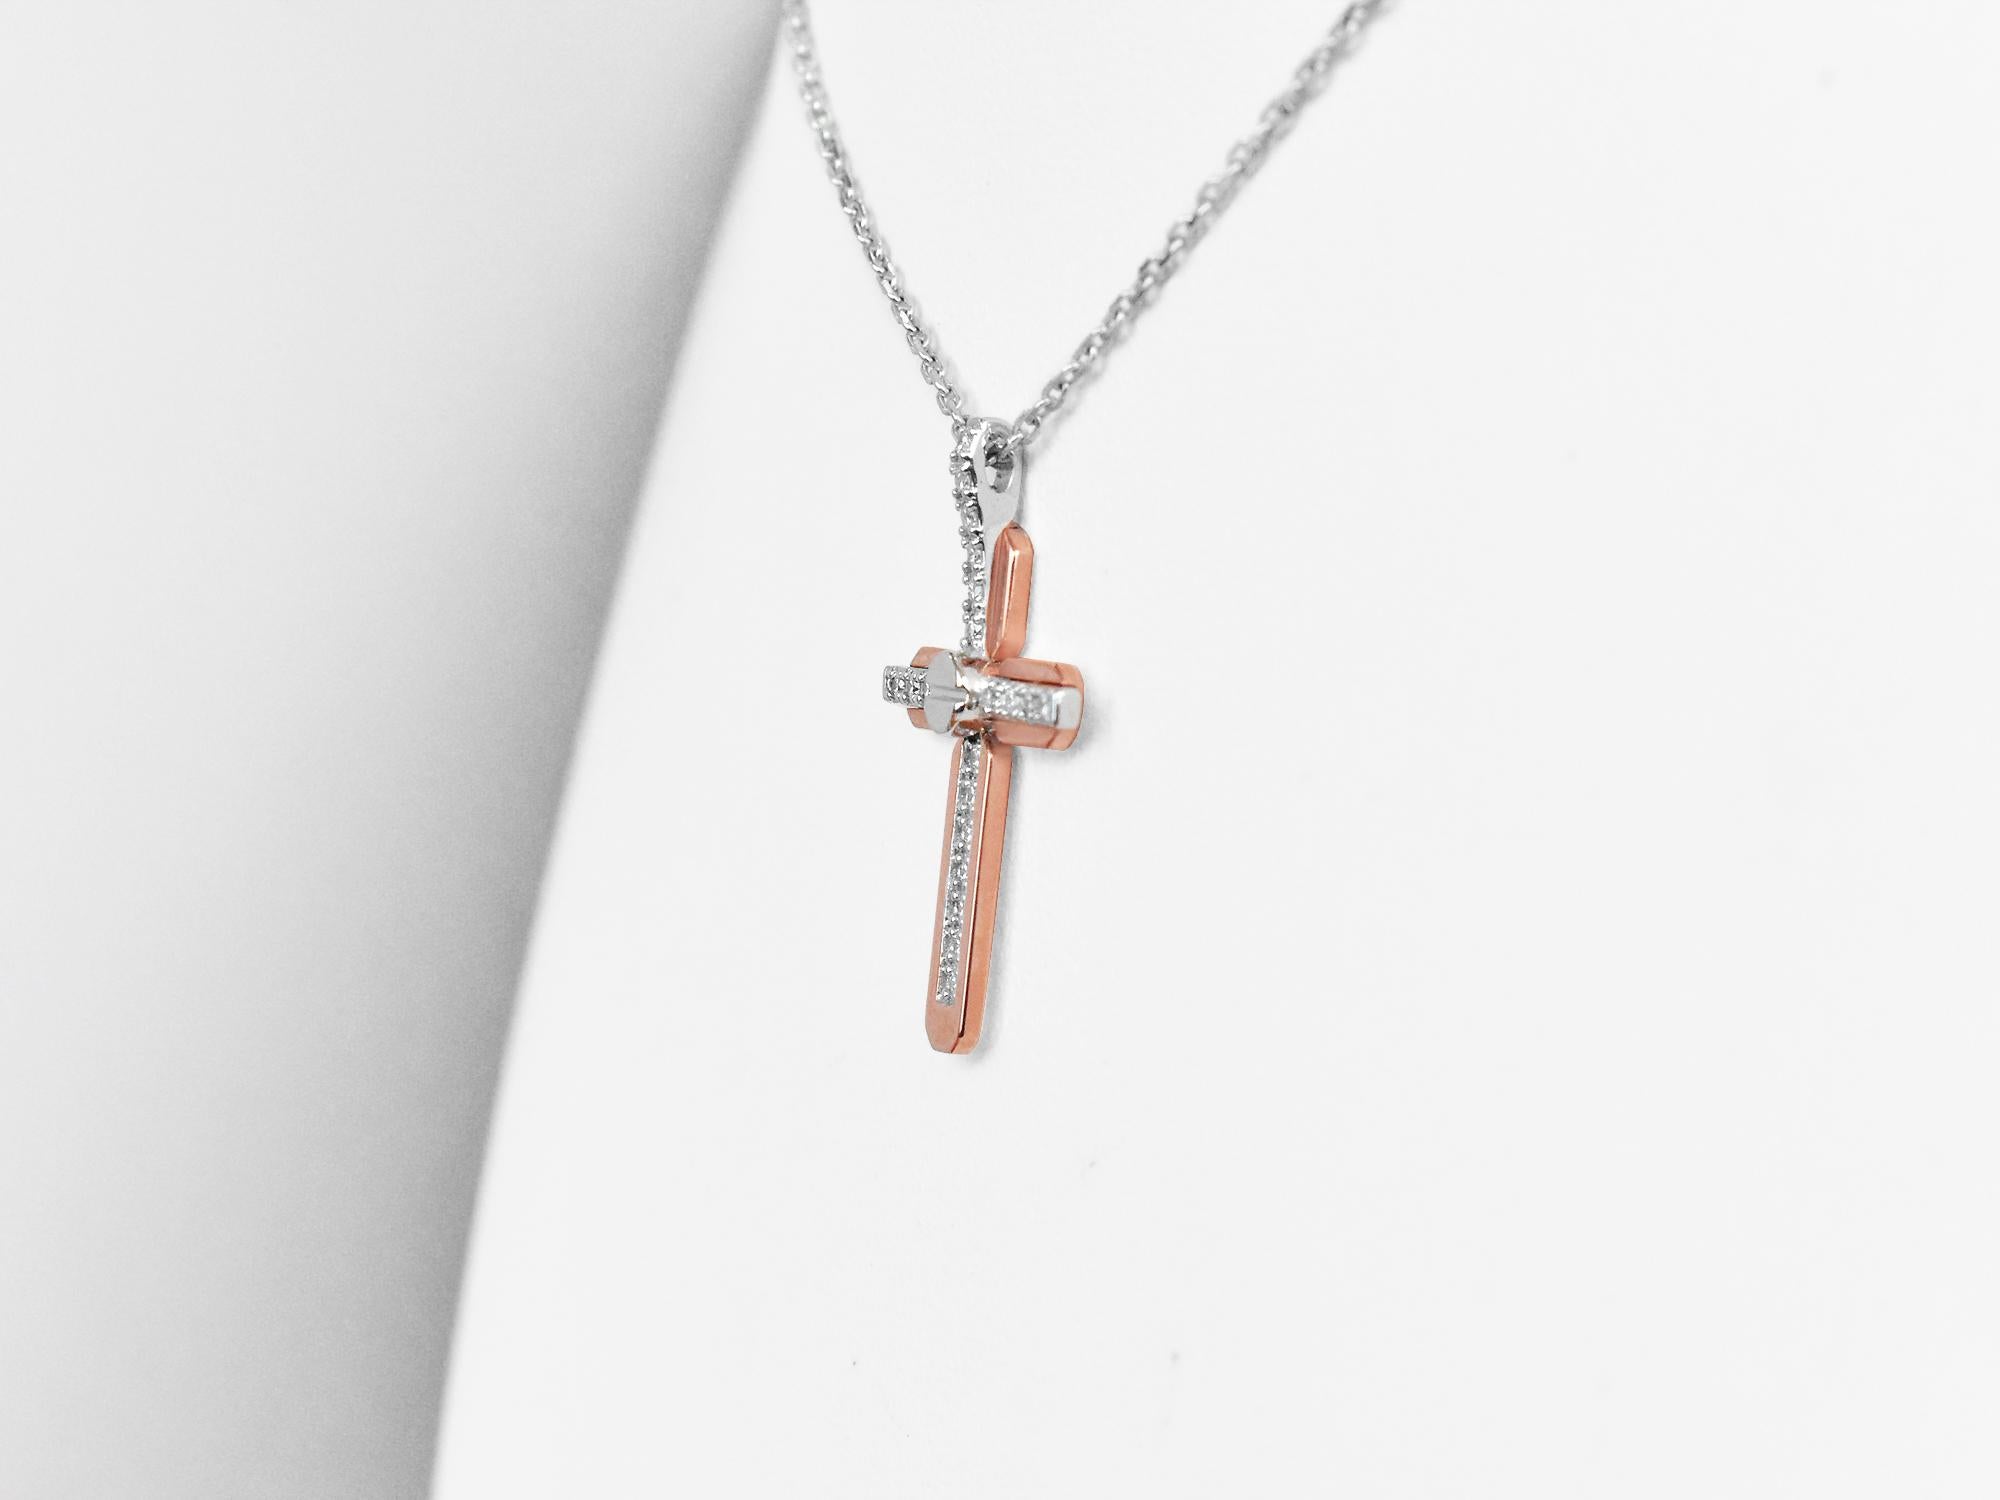 Round Cut 18 Karat Gold Cross Pendant Necklace Two Tone White Gold Rose Gold Diamond Pave For Sale